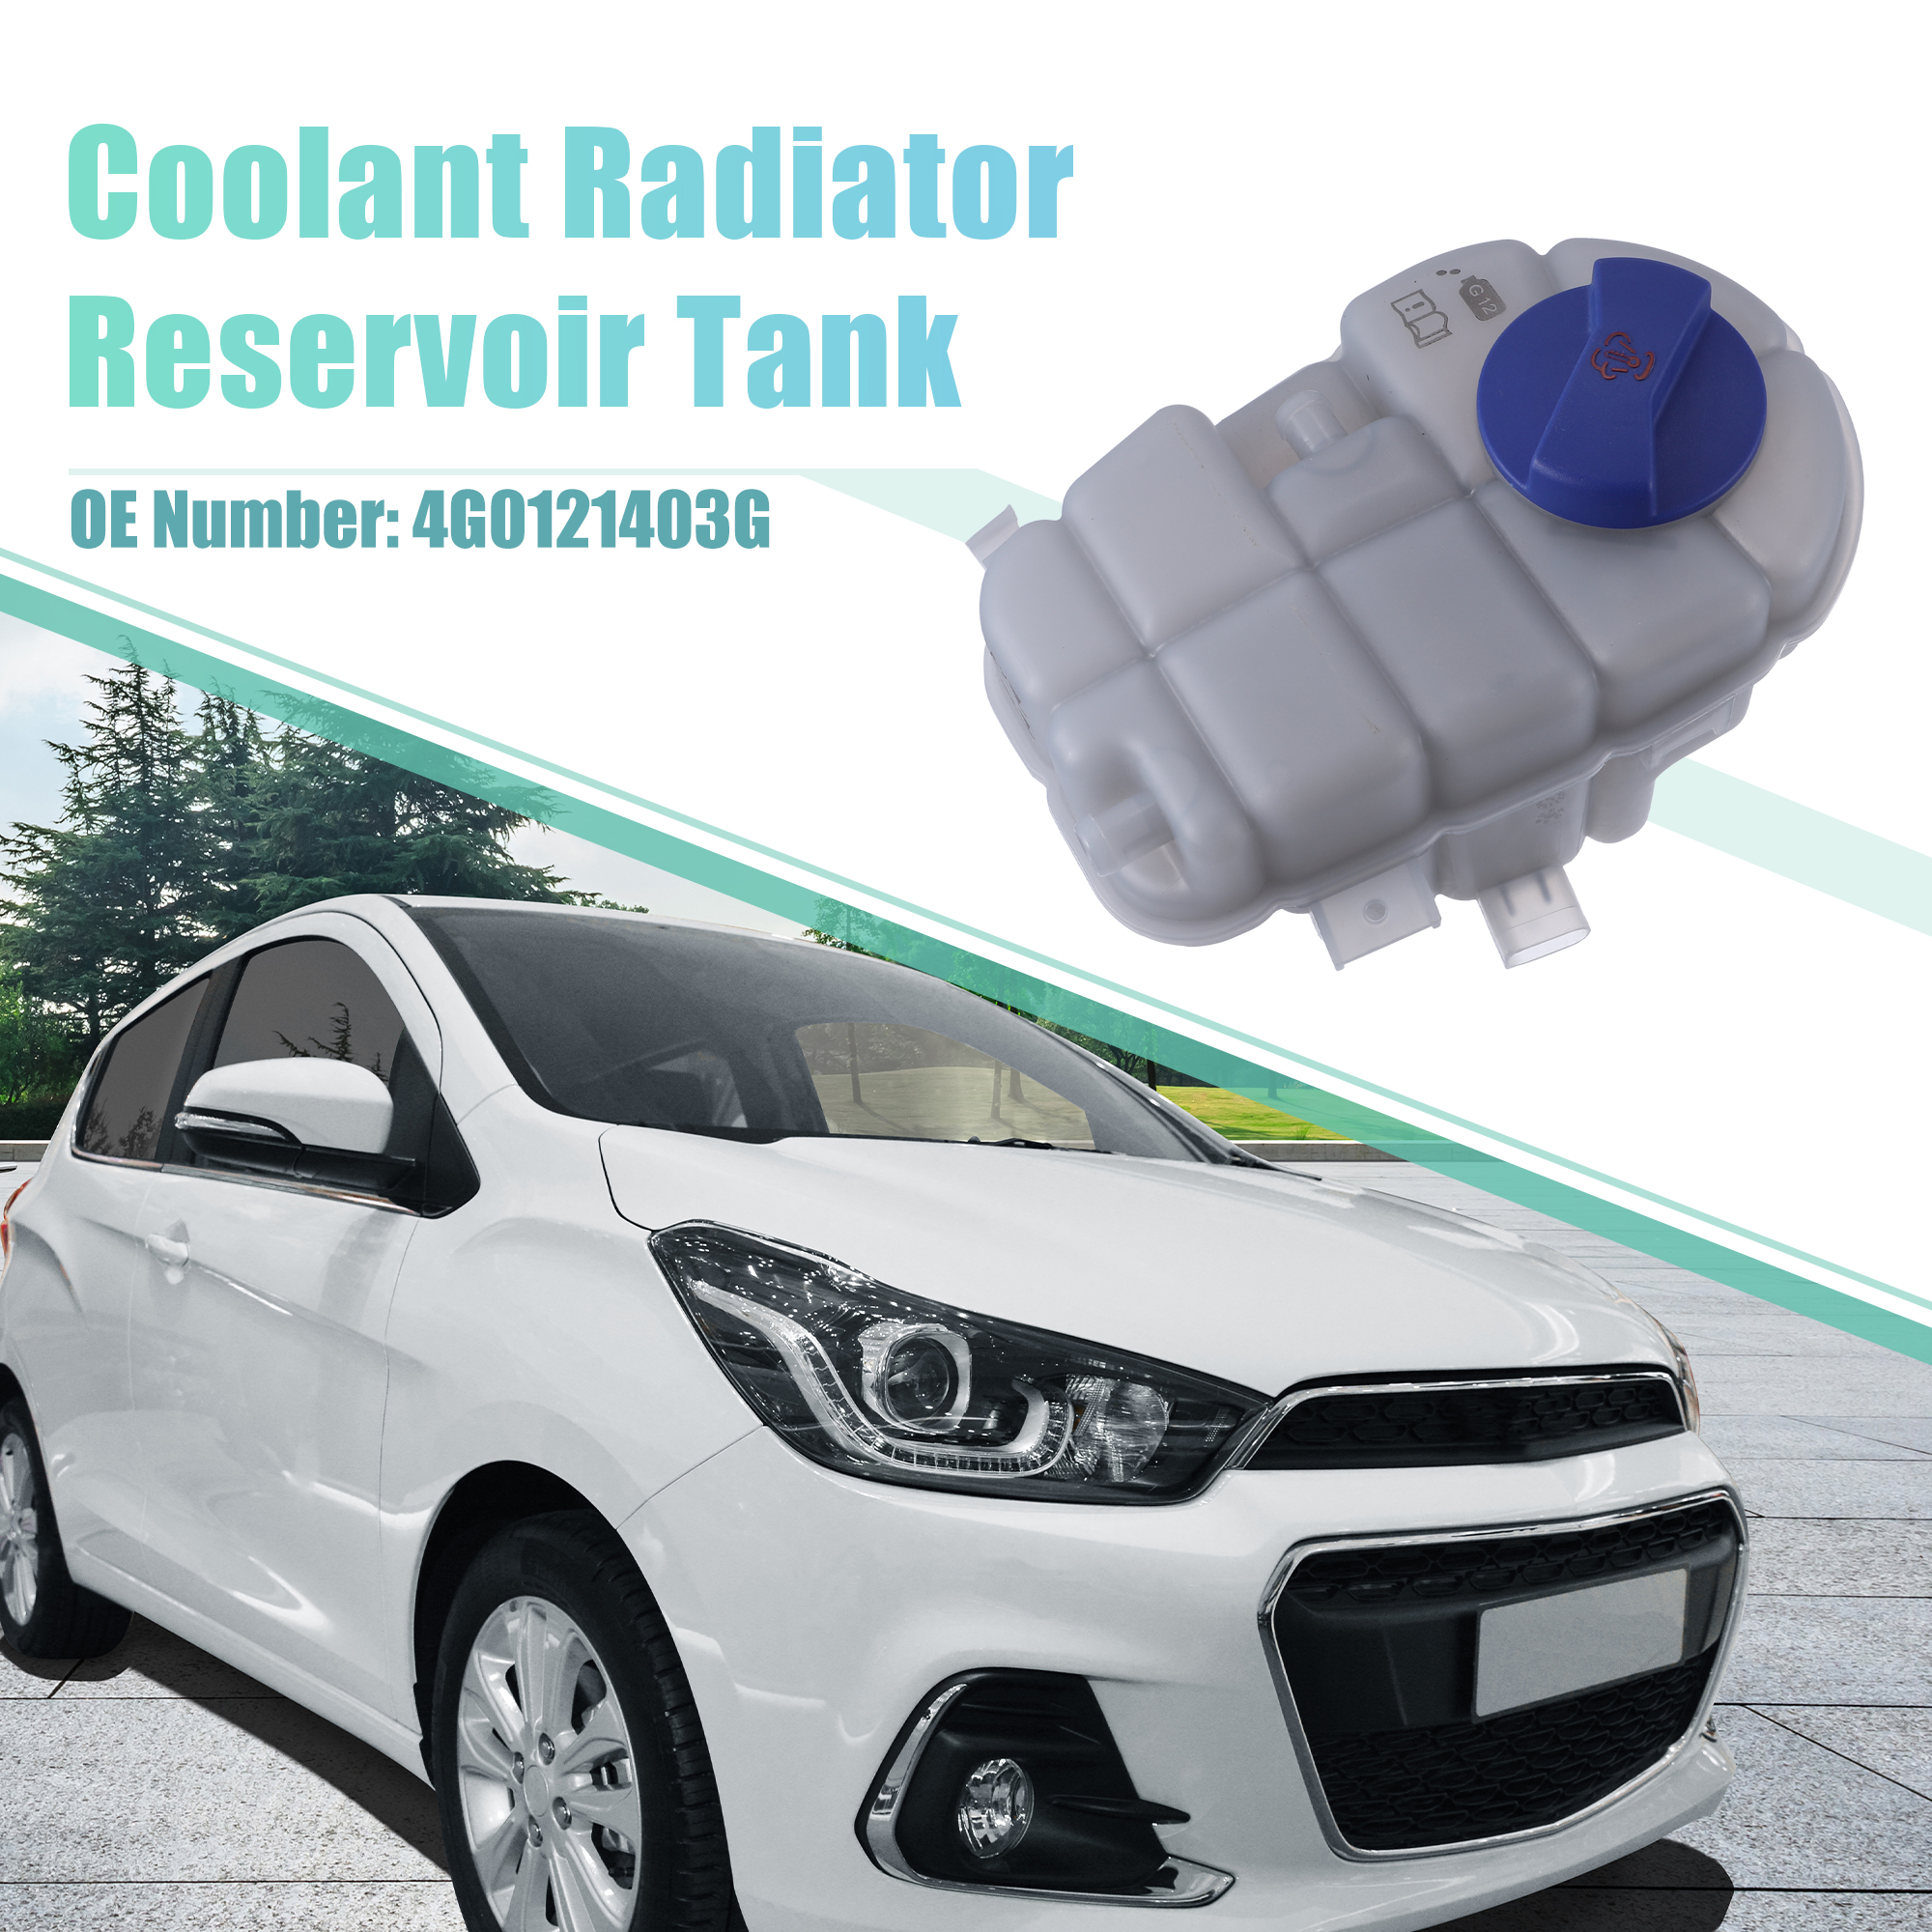 Unique Bargains Coolant Radiator Recovery Expansion Reservoir Tank 4G0121403G for Audi A6 4G2